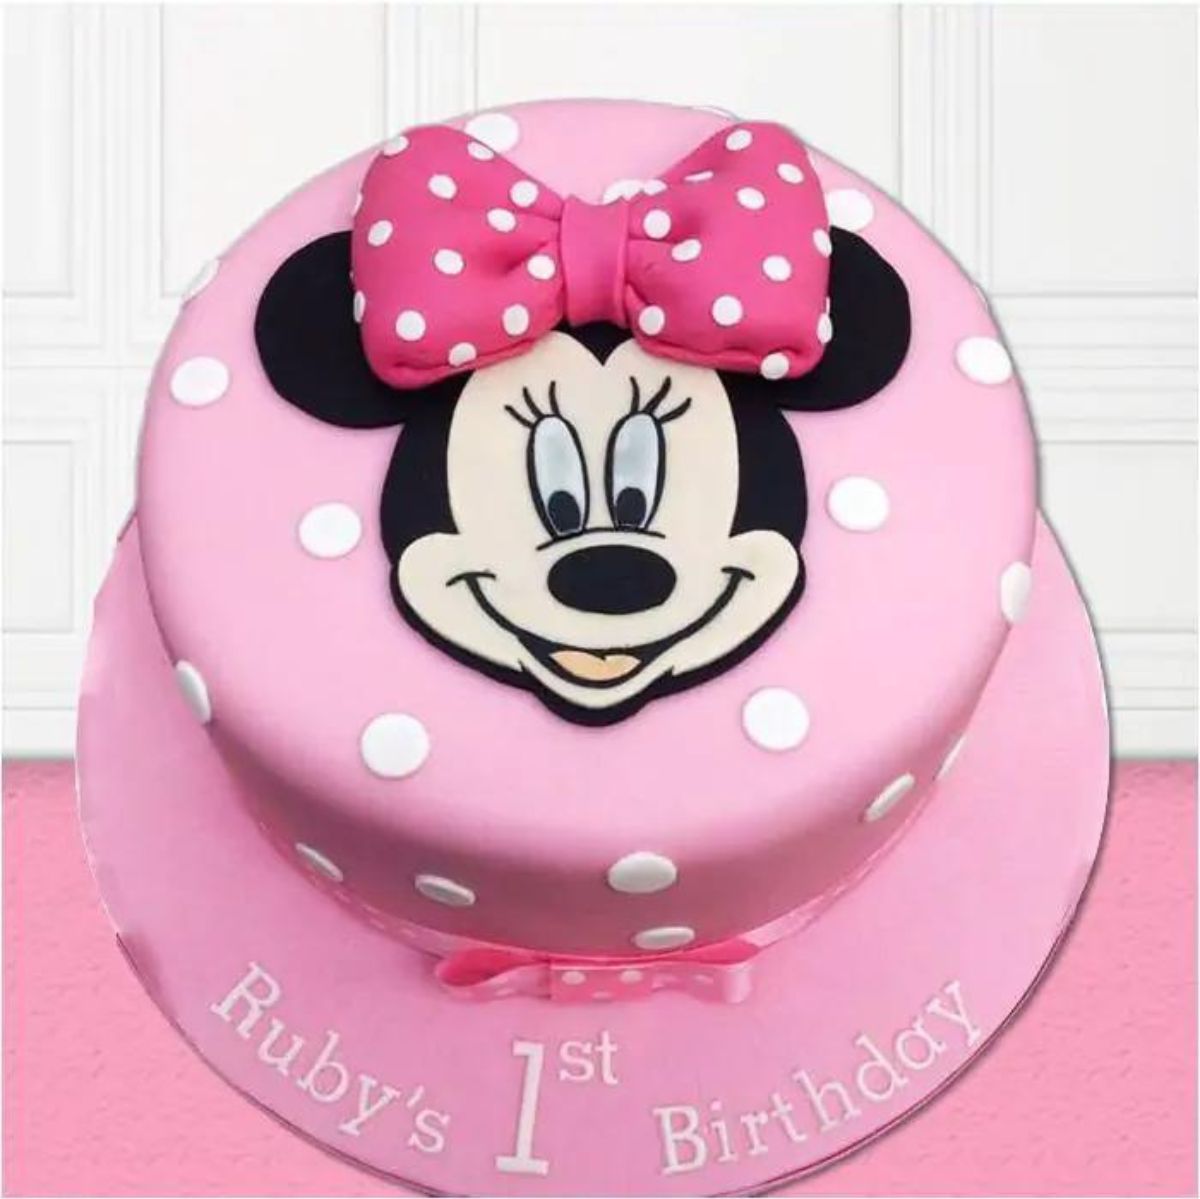 A cute & simple Mickey Mouse cake - Wilma's Cake Creations | Facebook